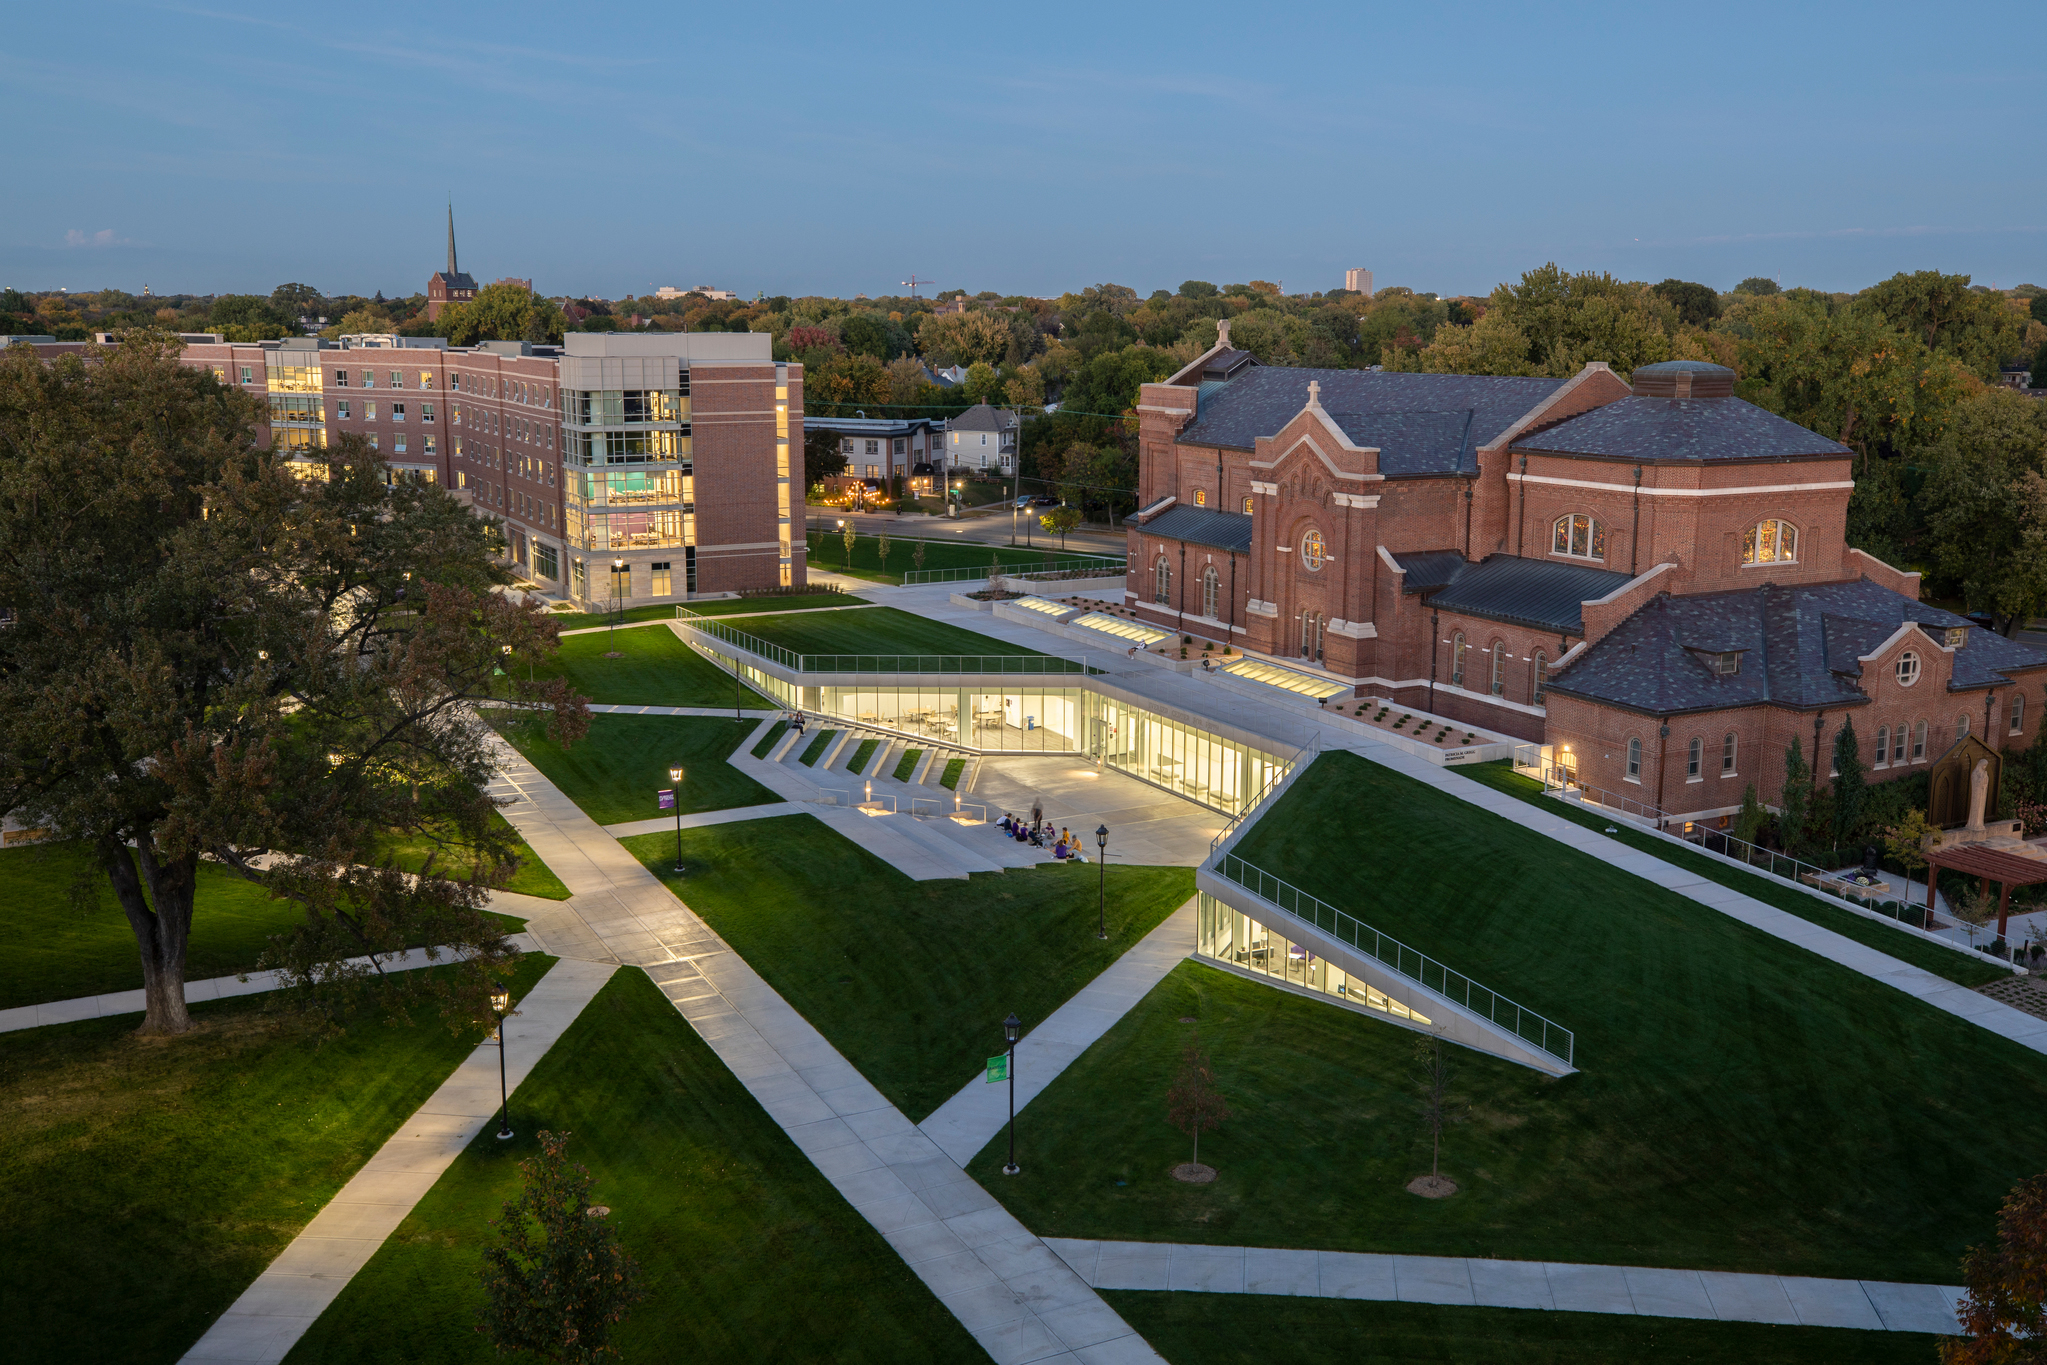 The Iversen Center for Faith invites the campus into the spiritual heart of campus